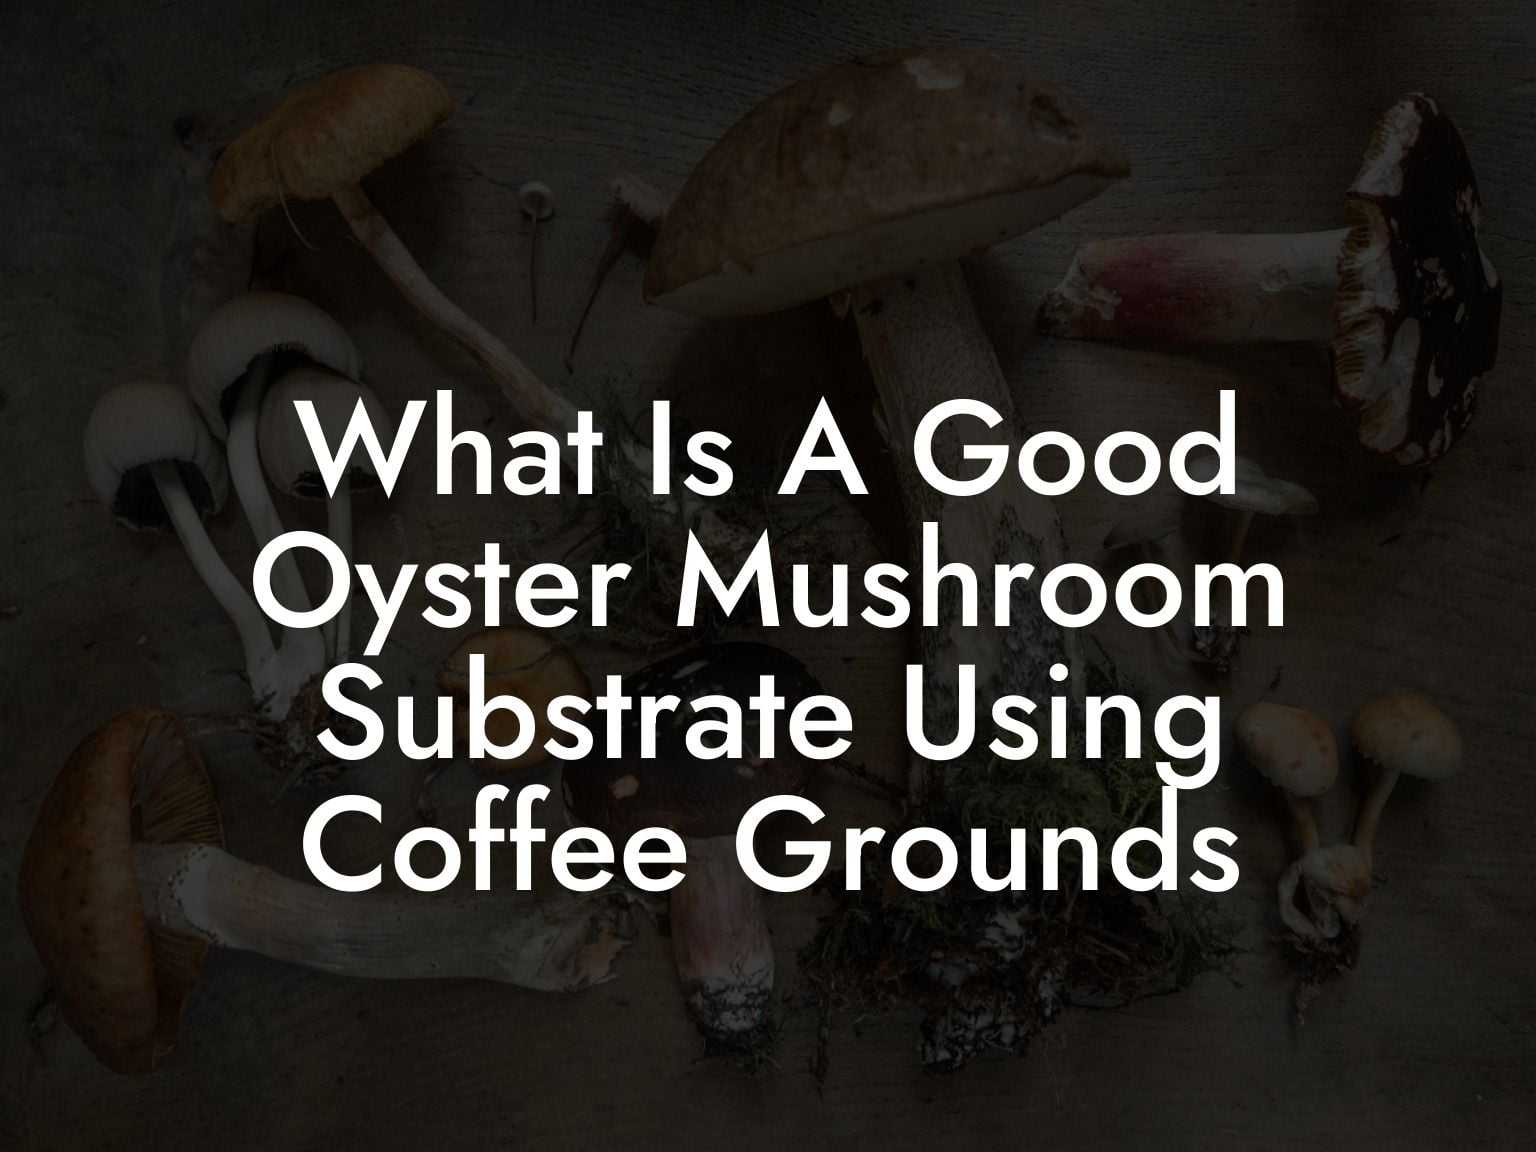 What Is A Good Oyster Mushroom Substrate Using Coffee Grounds